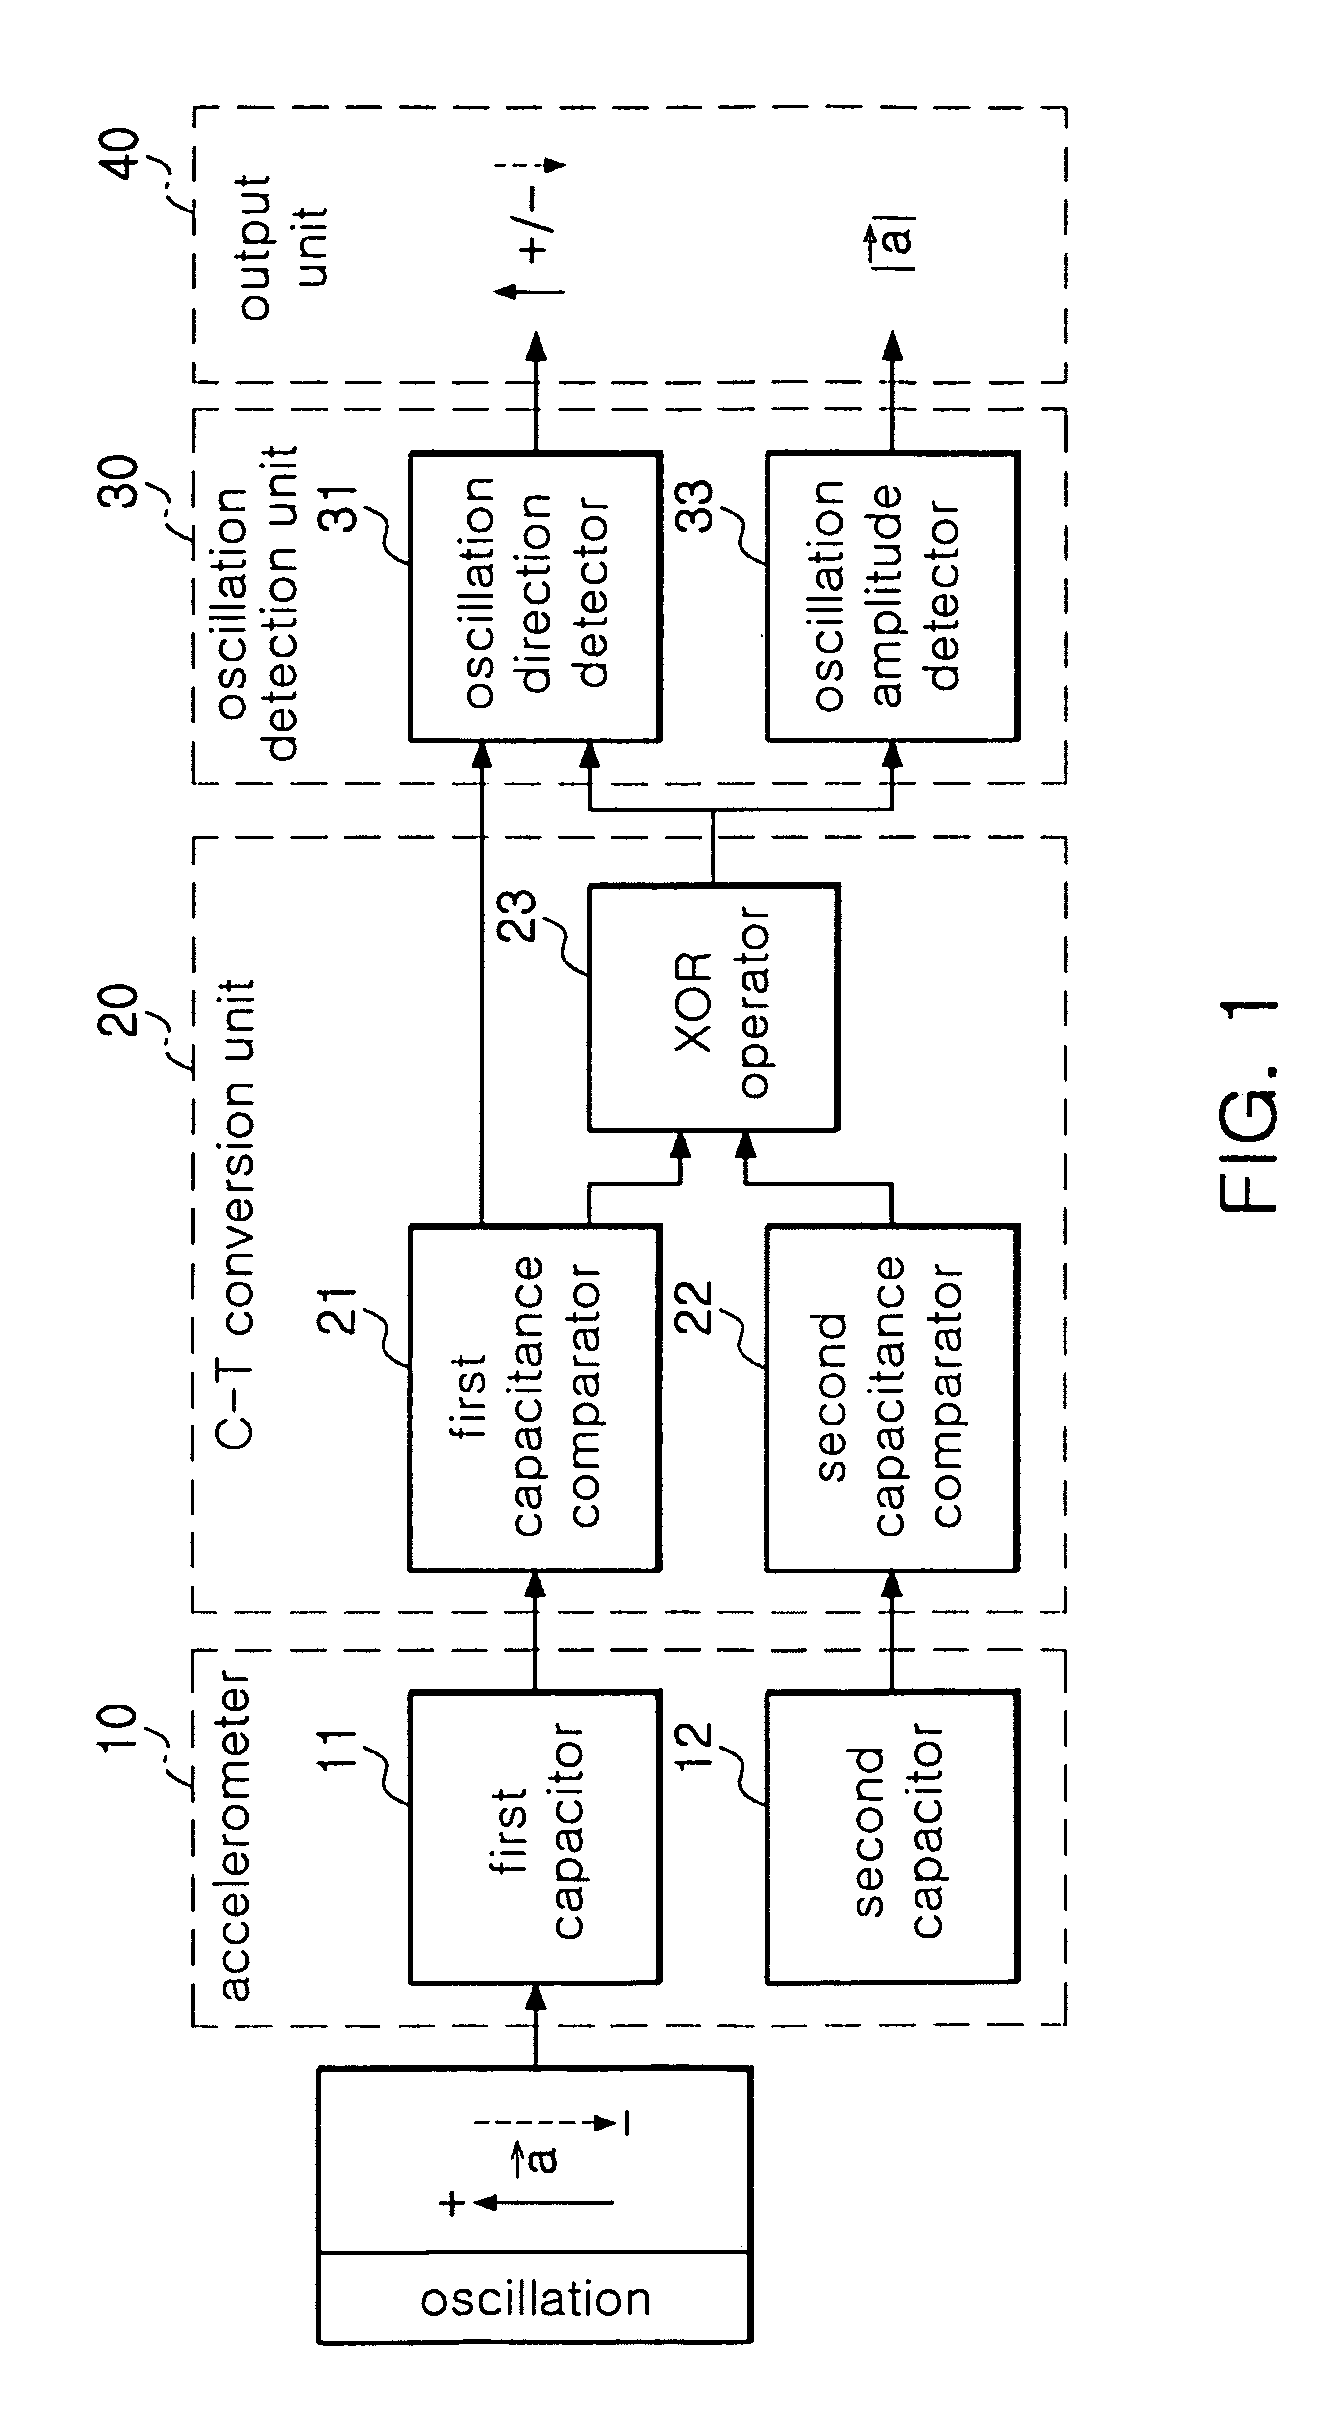 Bidirectional readout circuit for detecting direction and amplitude of capacitive MEMS accelerometers